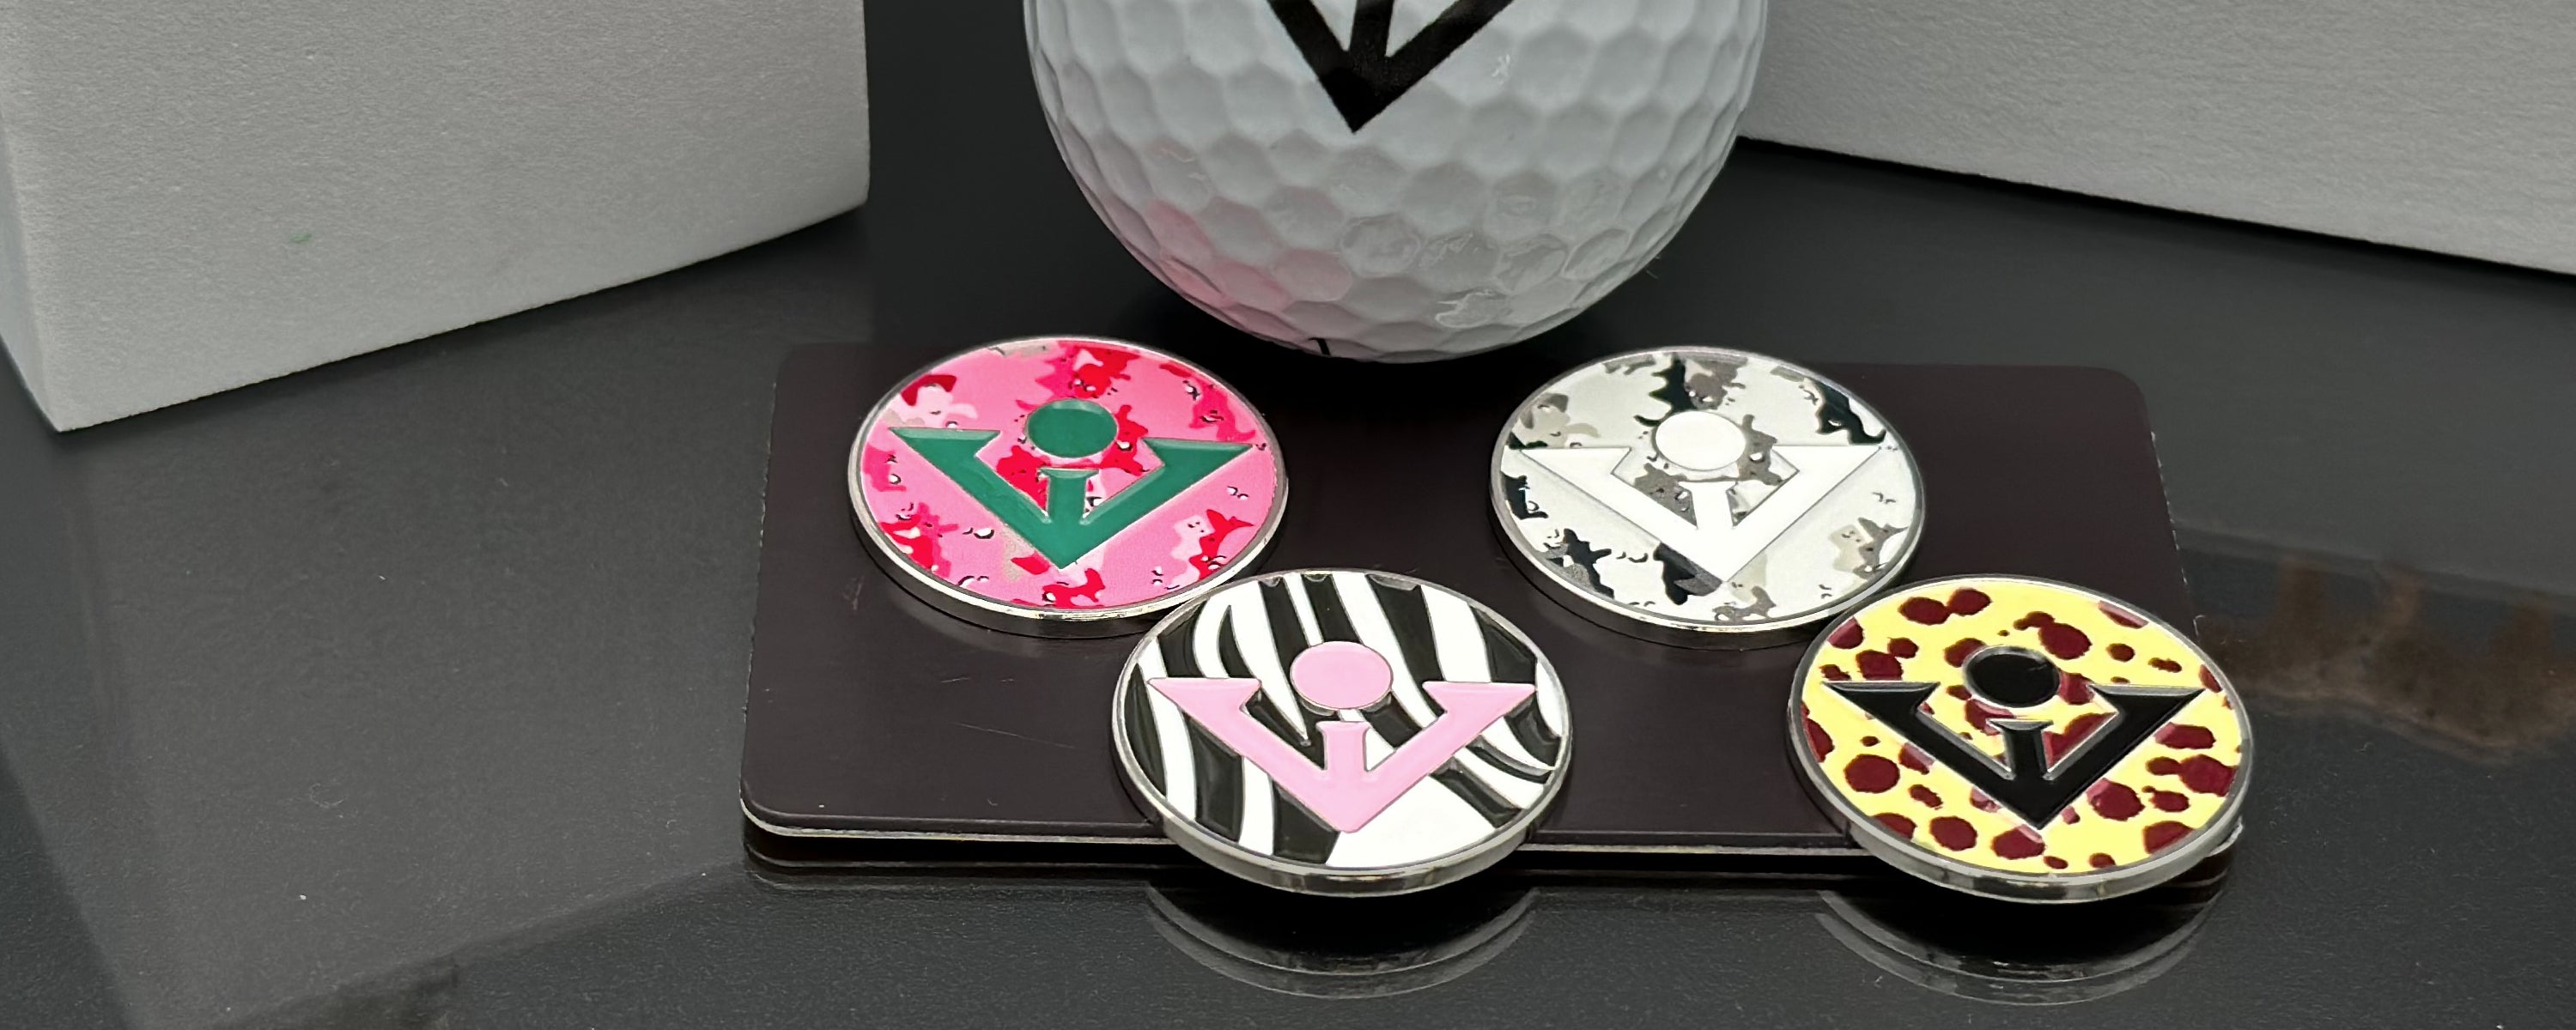 Printed magnetic golf ball marker collection lined up with a black and white background, showing the various designs and colors.